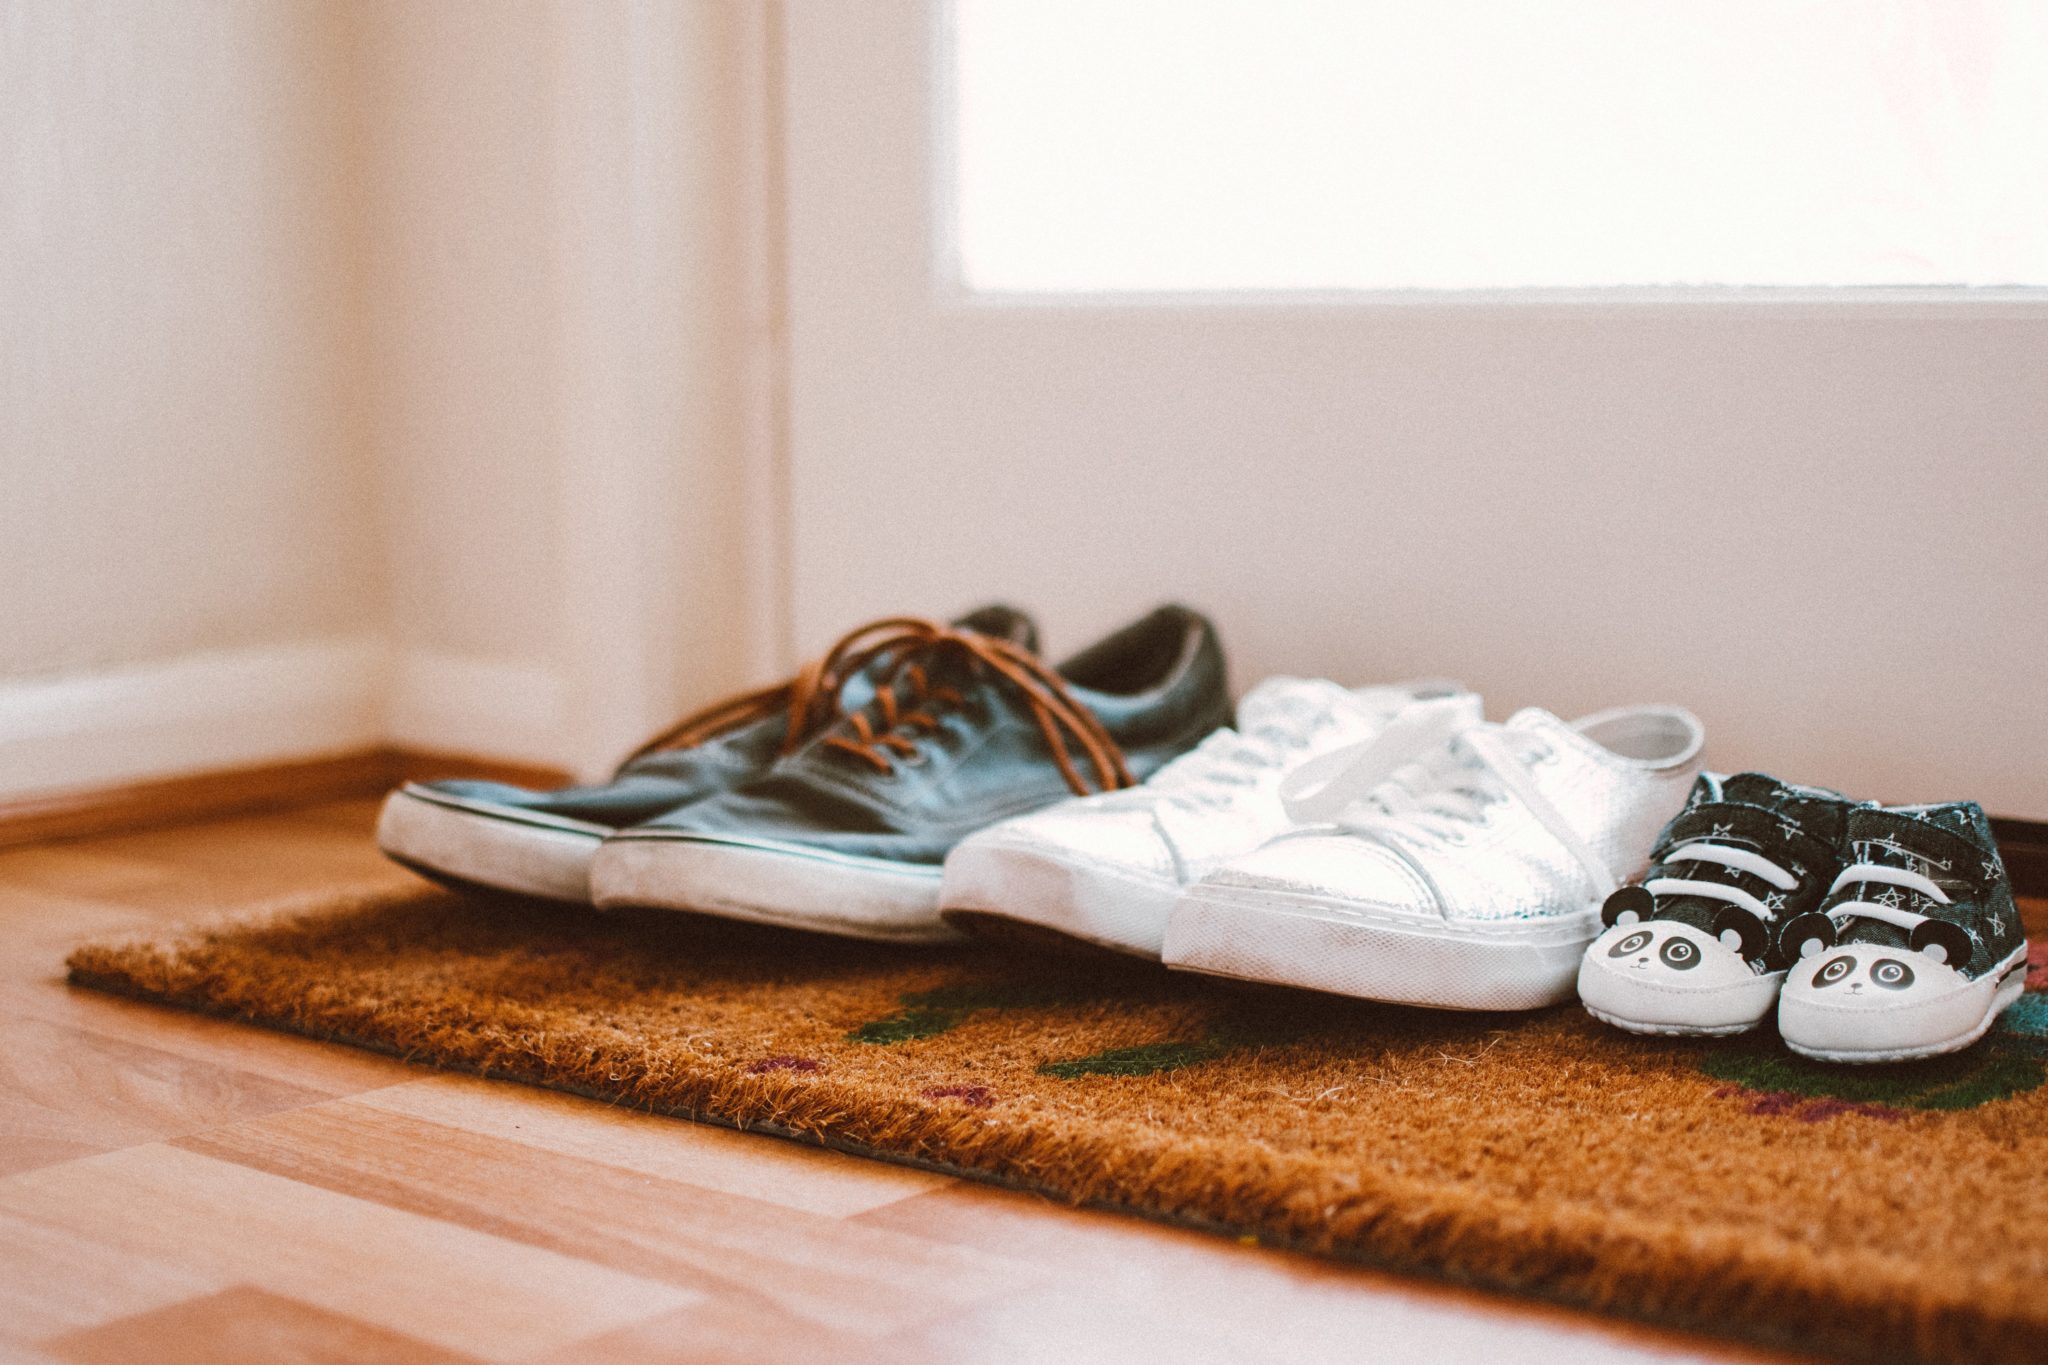 Home organizing best practice: take shoes off at entrance